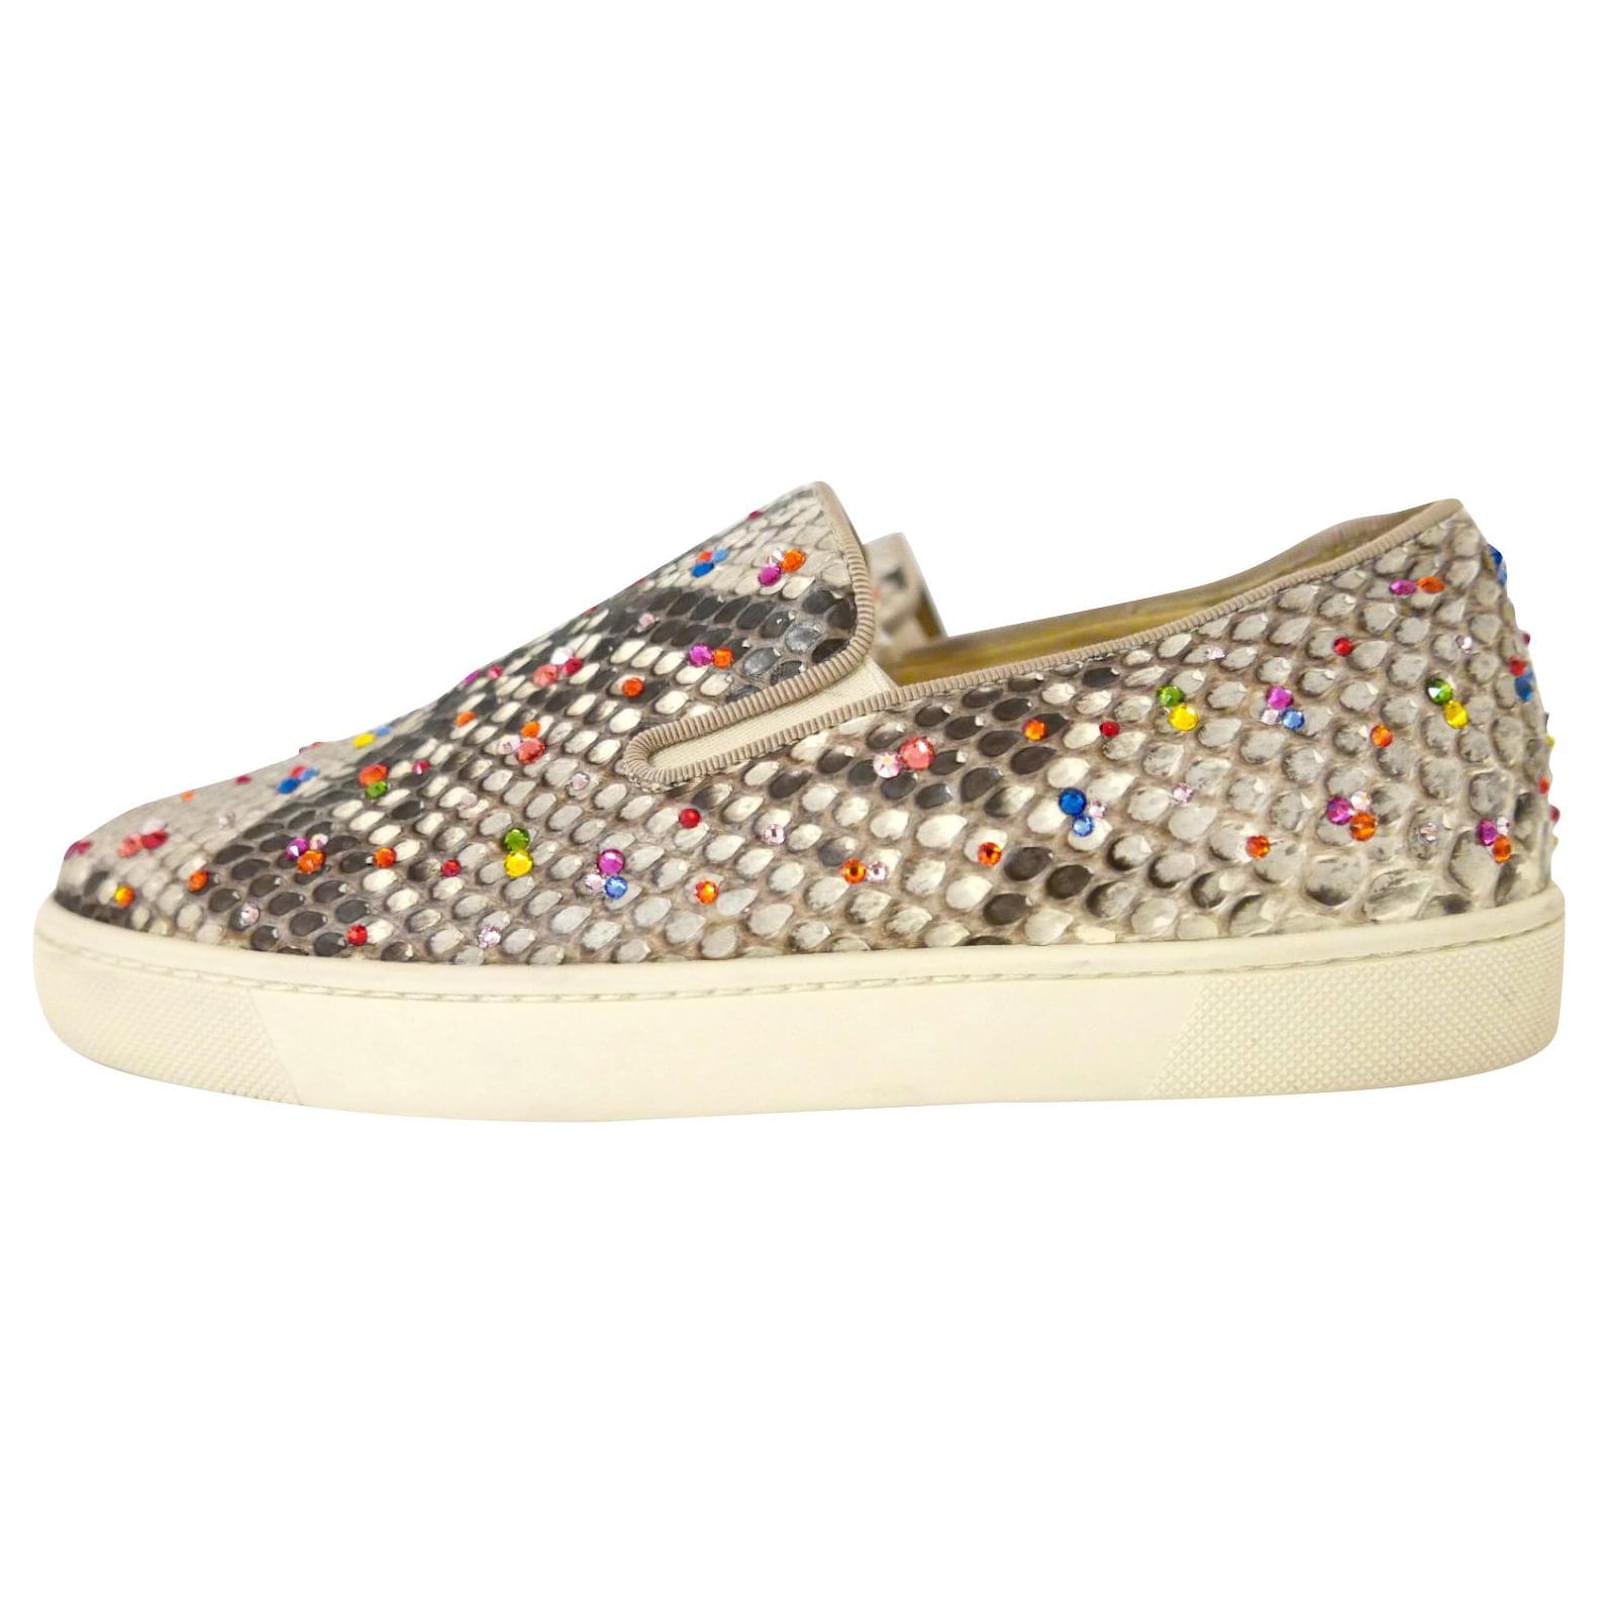 Christian Louboutin Snakeskin & Crystal Boat Sneakers Multiple colors Python ref.449343 - Closet